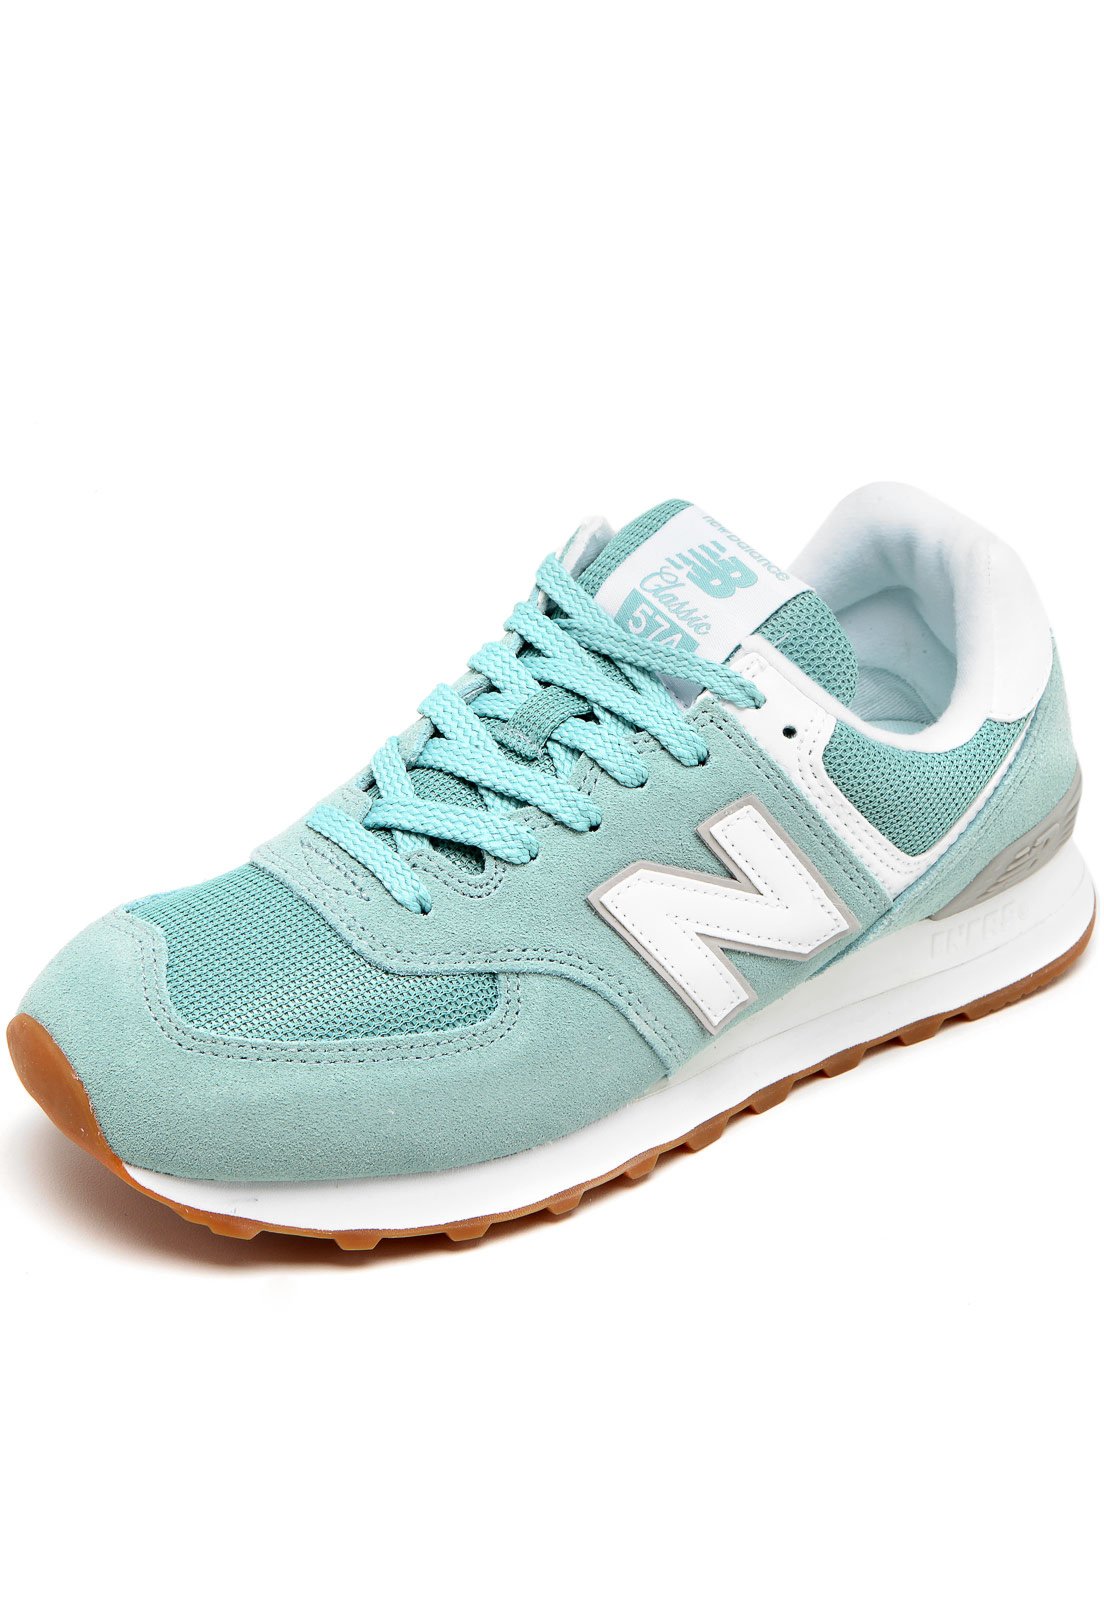 new balance verde, OFF 72%,welcome to buy!